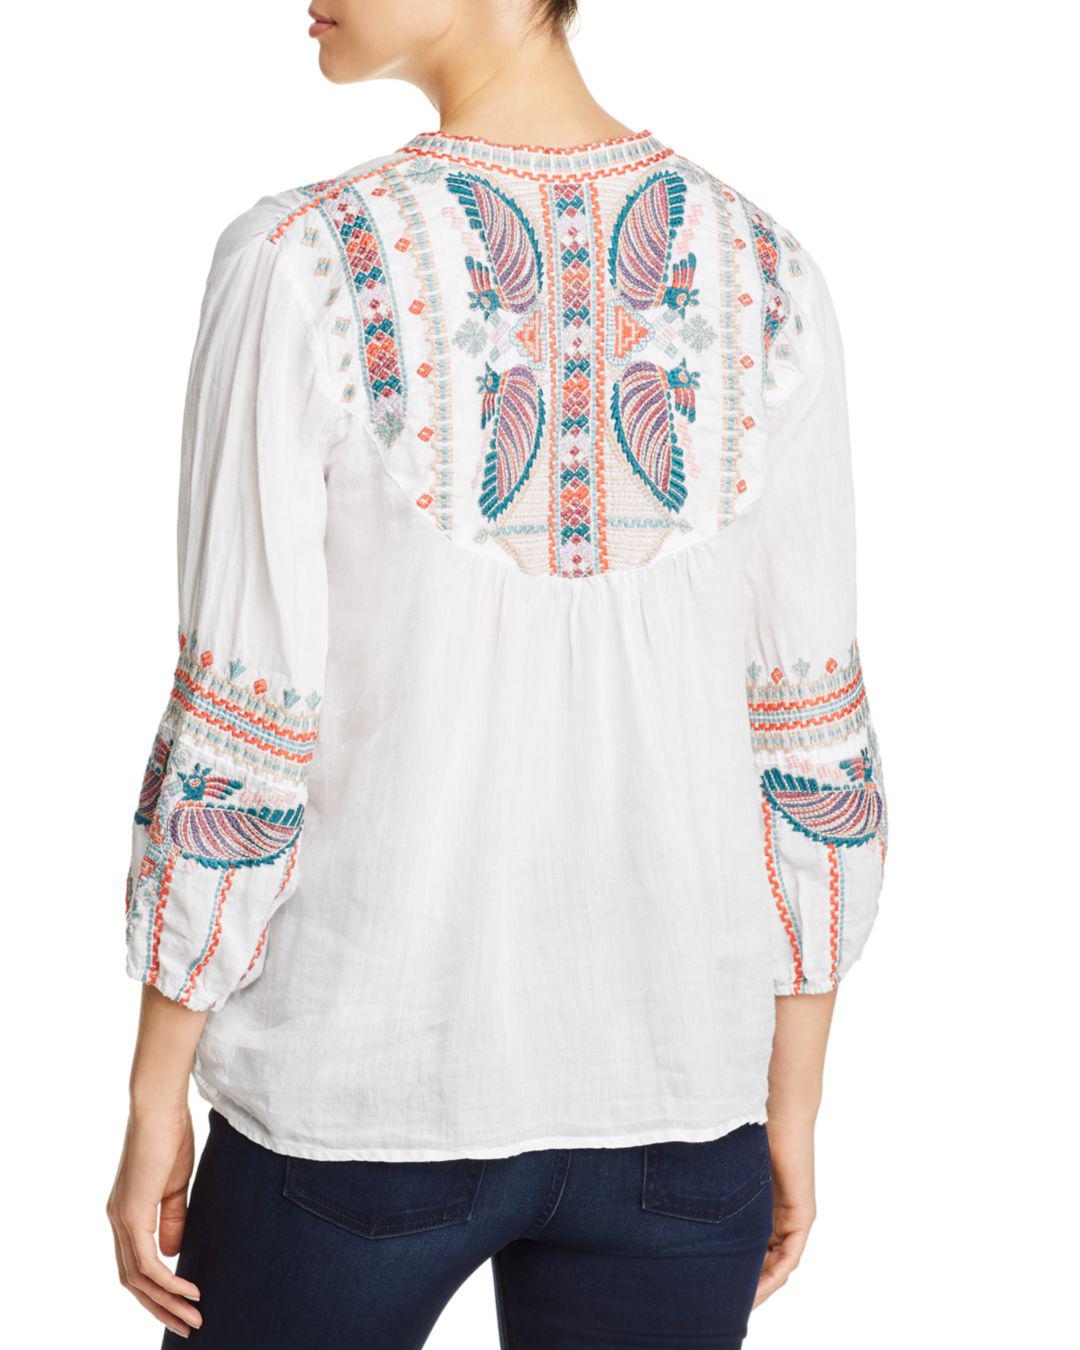 Johnny Was Claudine Embroidered Peasant Top in White - Lyst